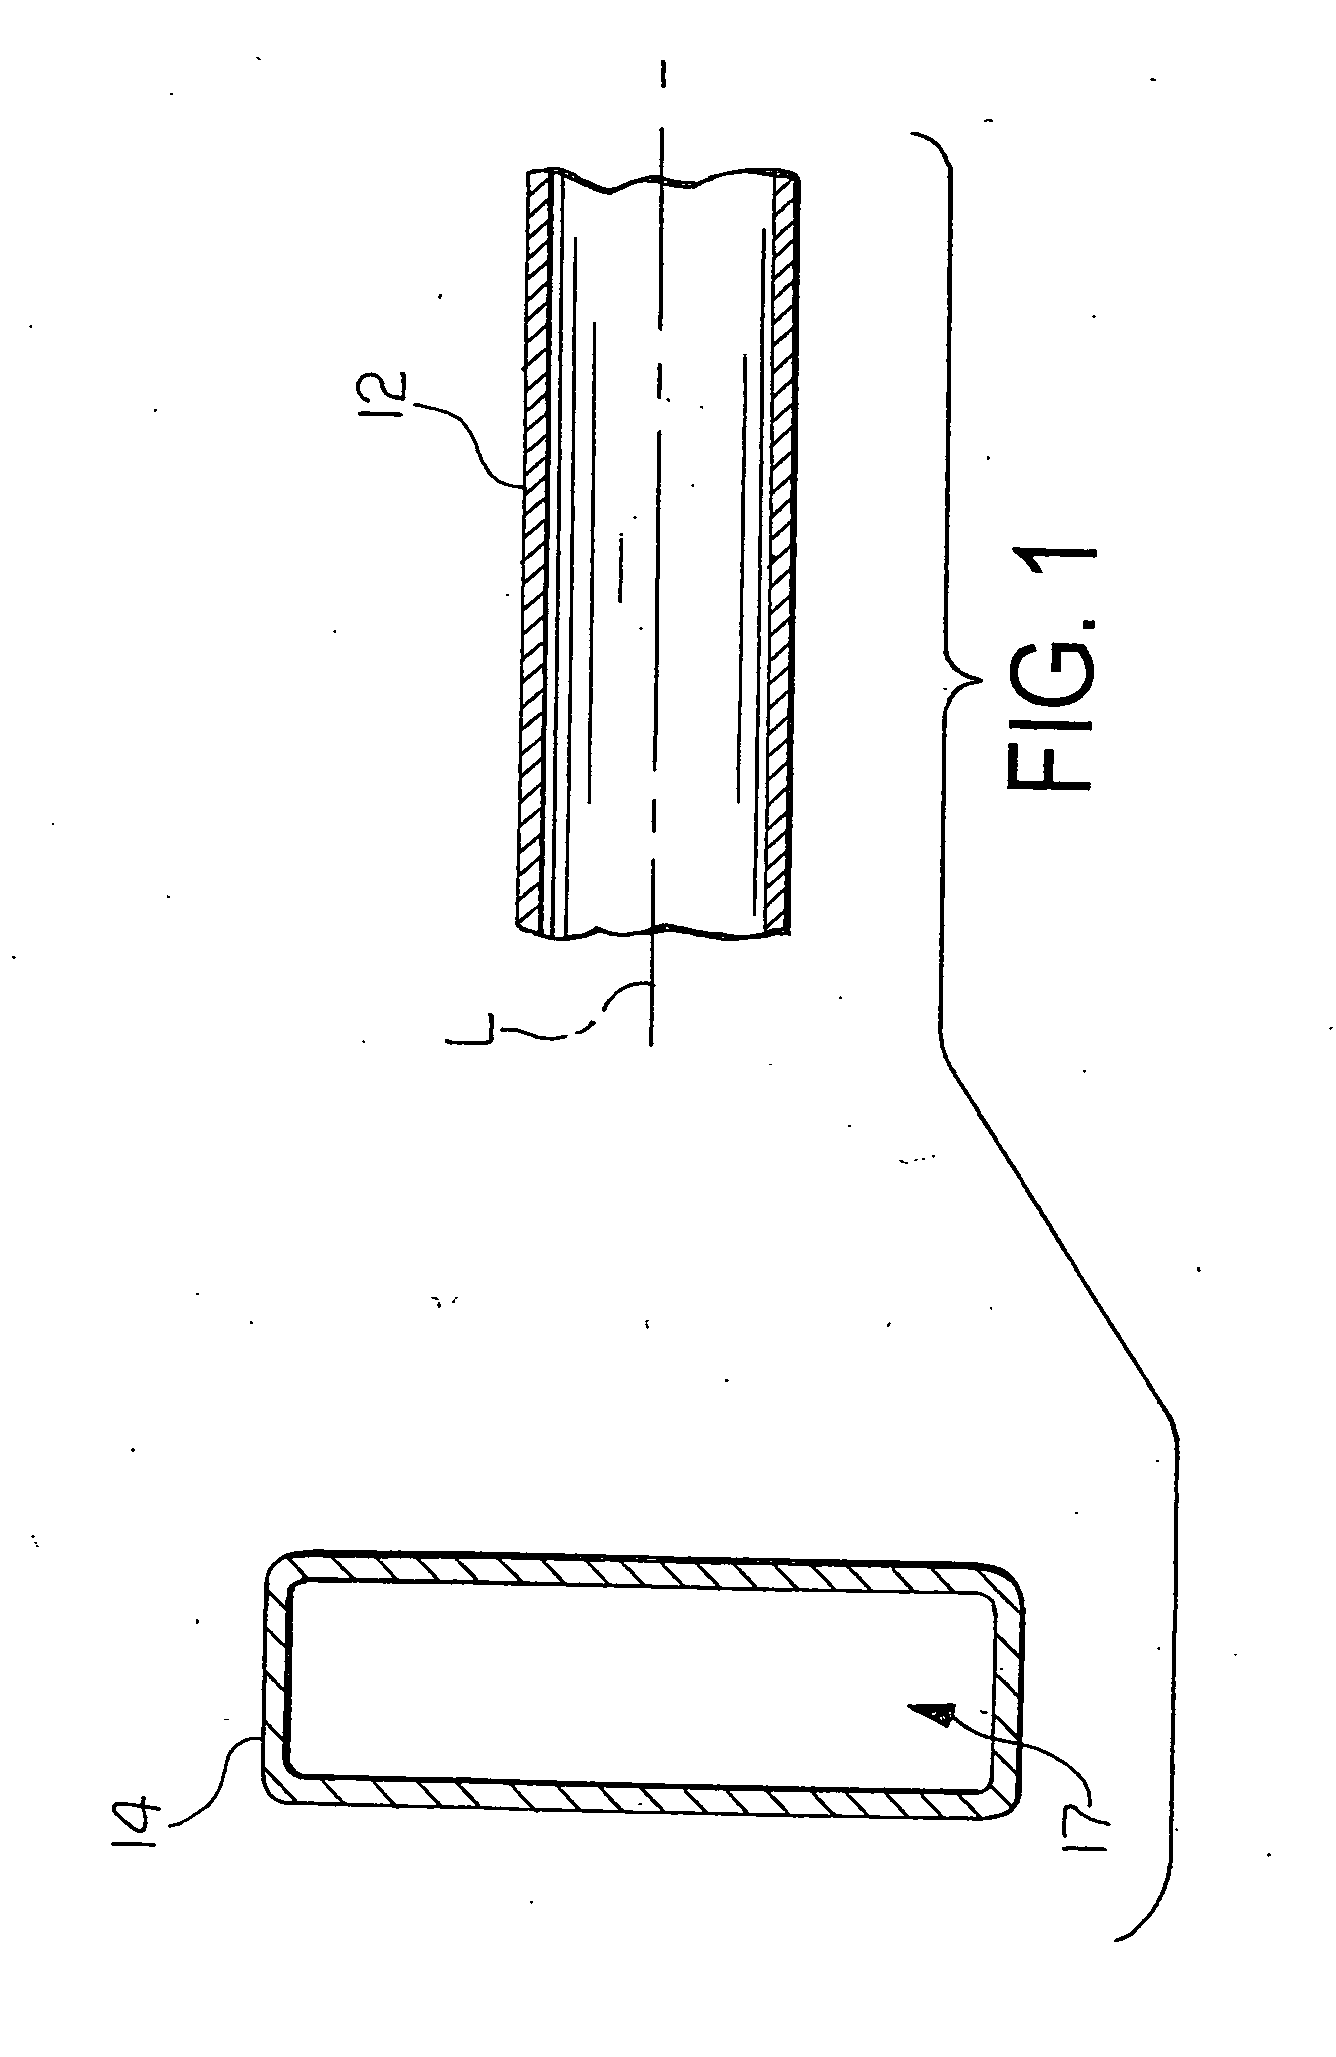 Method of permanently joining first and second metallic components